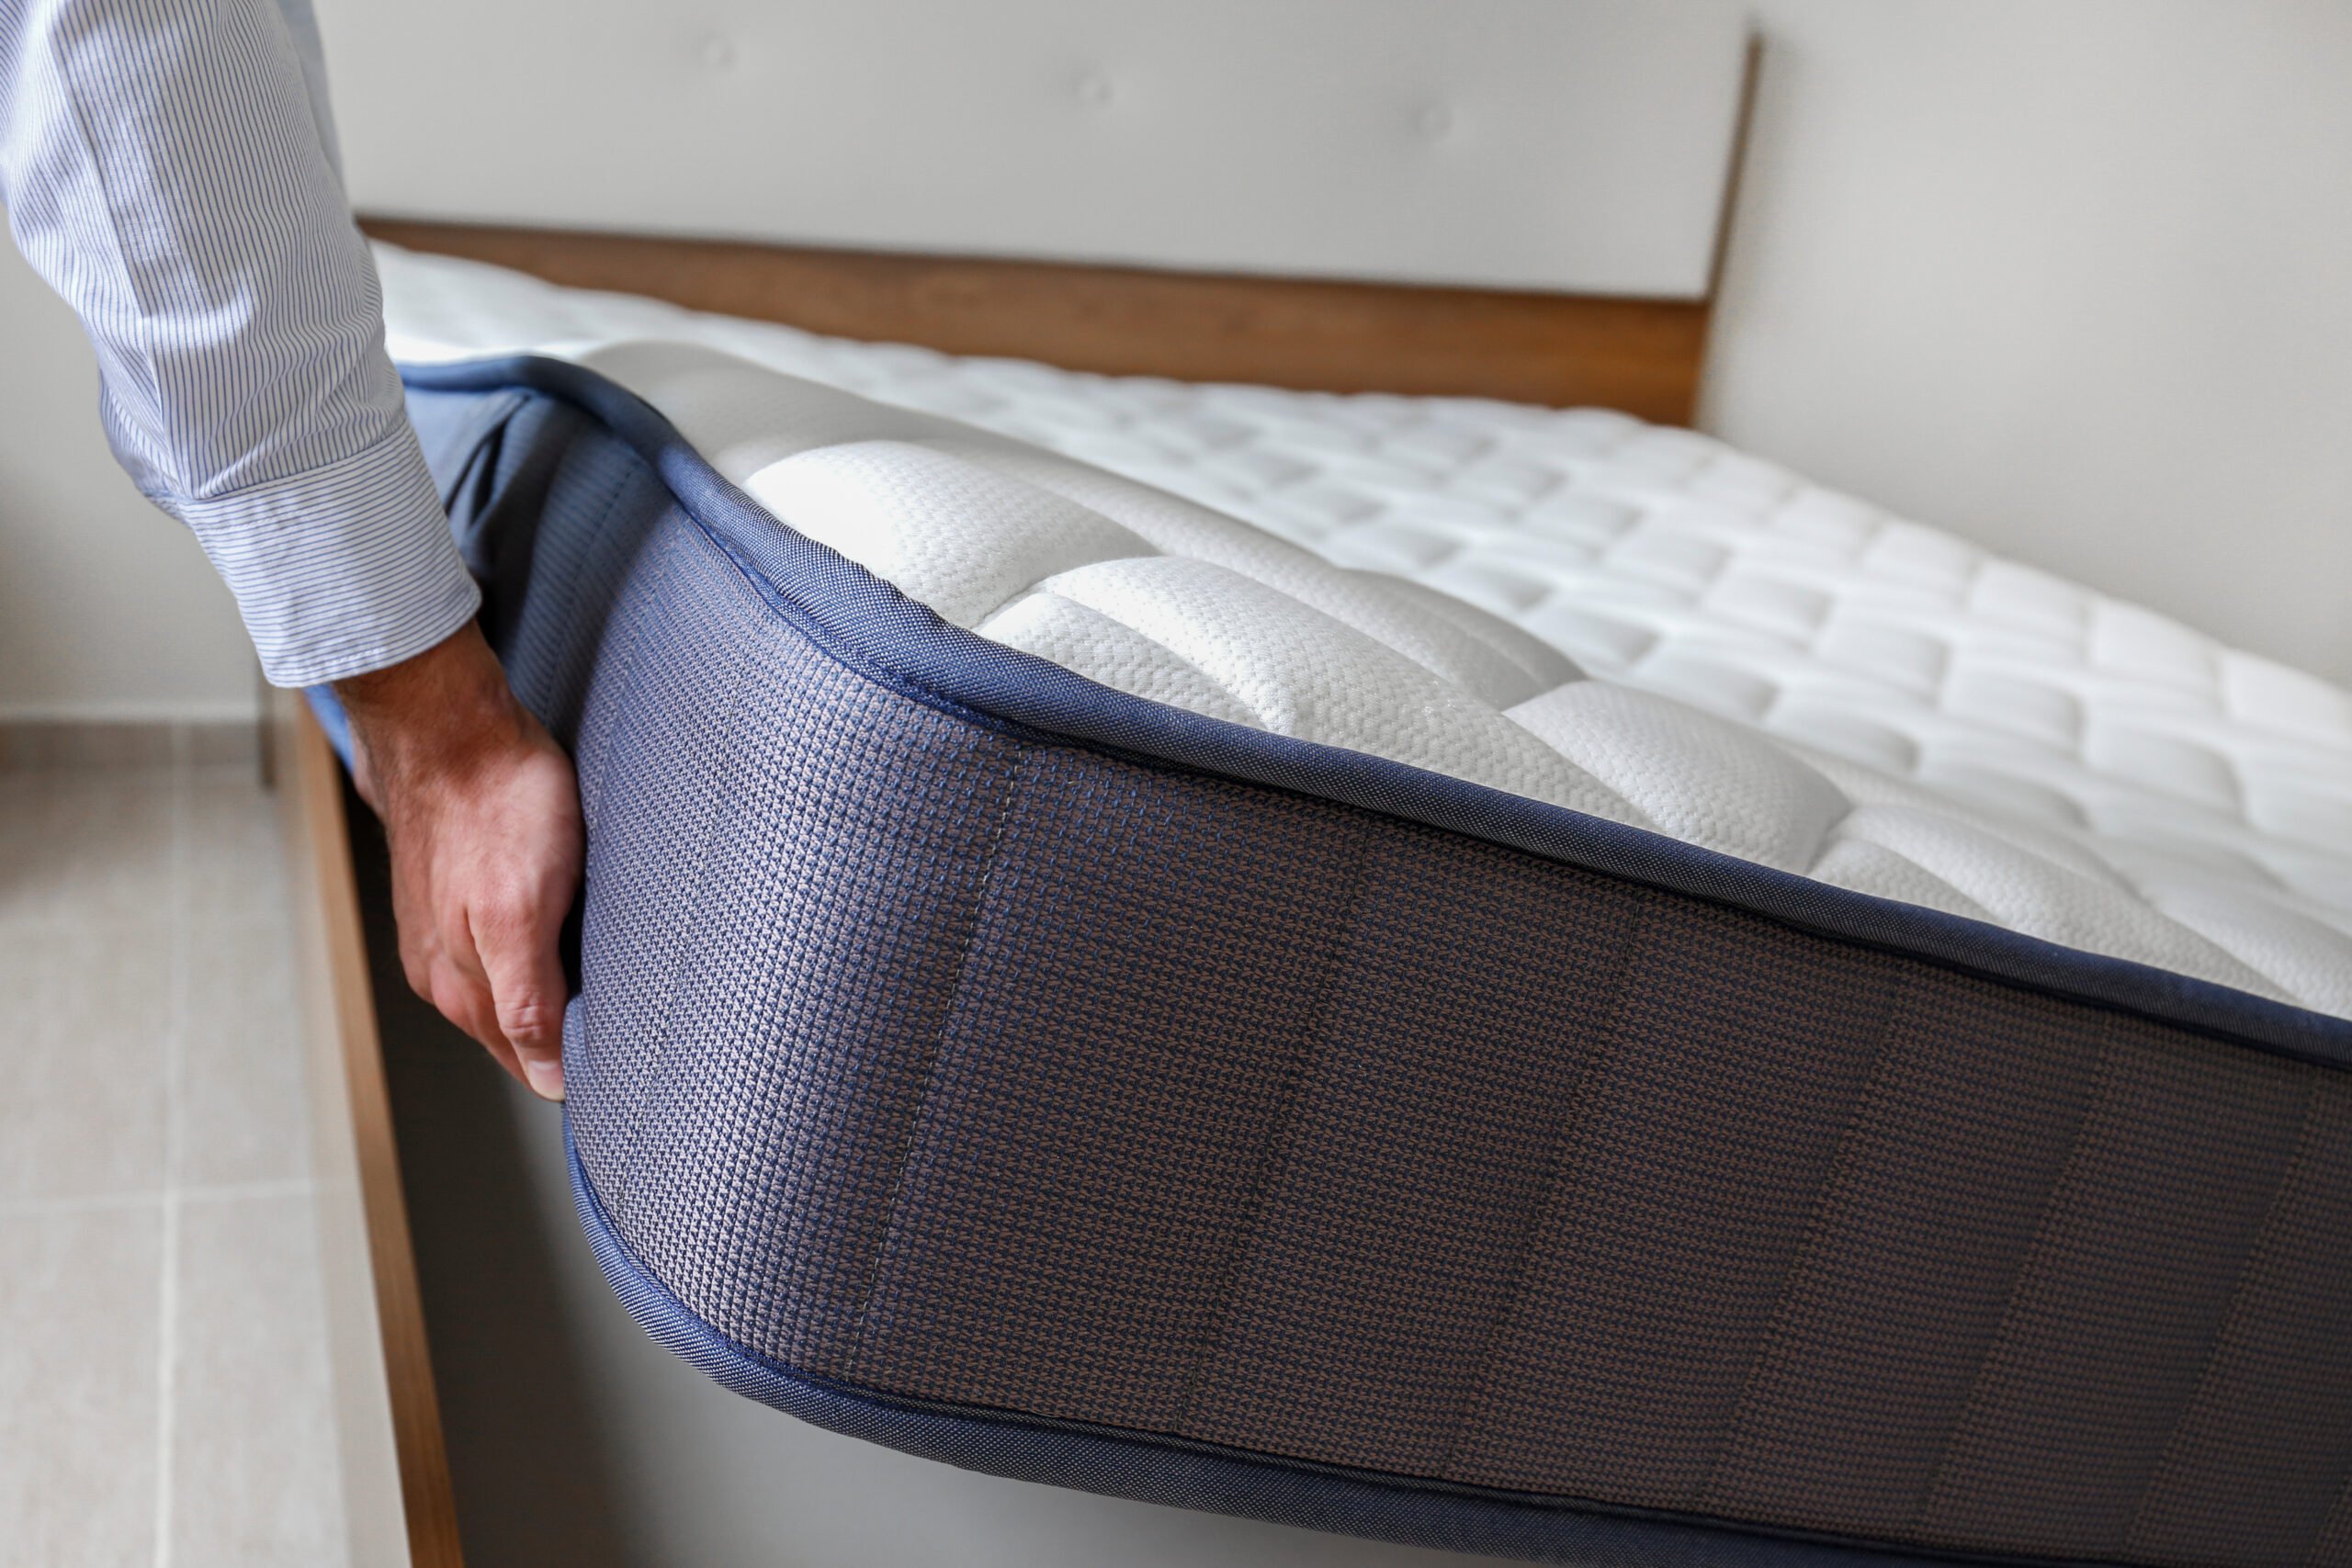 Is It Illegal to Sell a Used Mattress? A State-by-State Guide